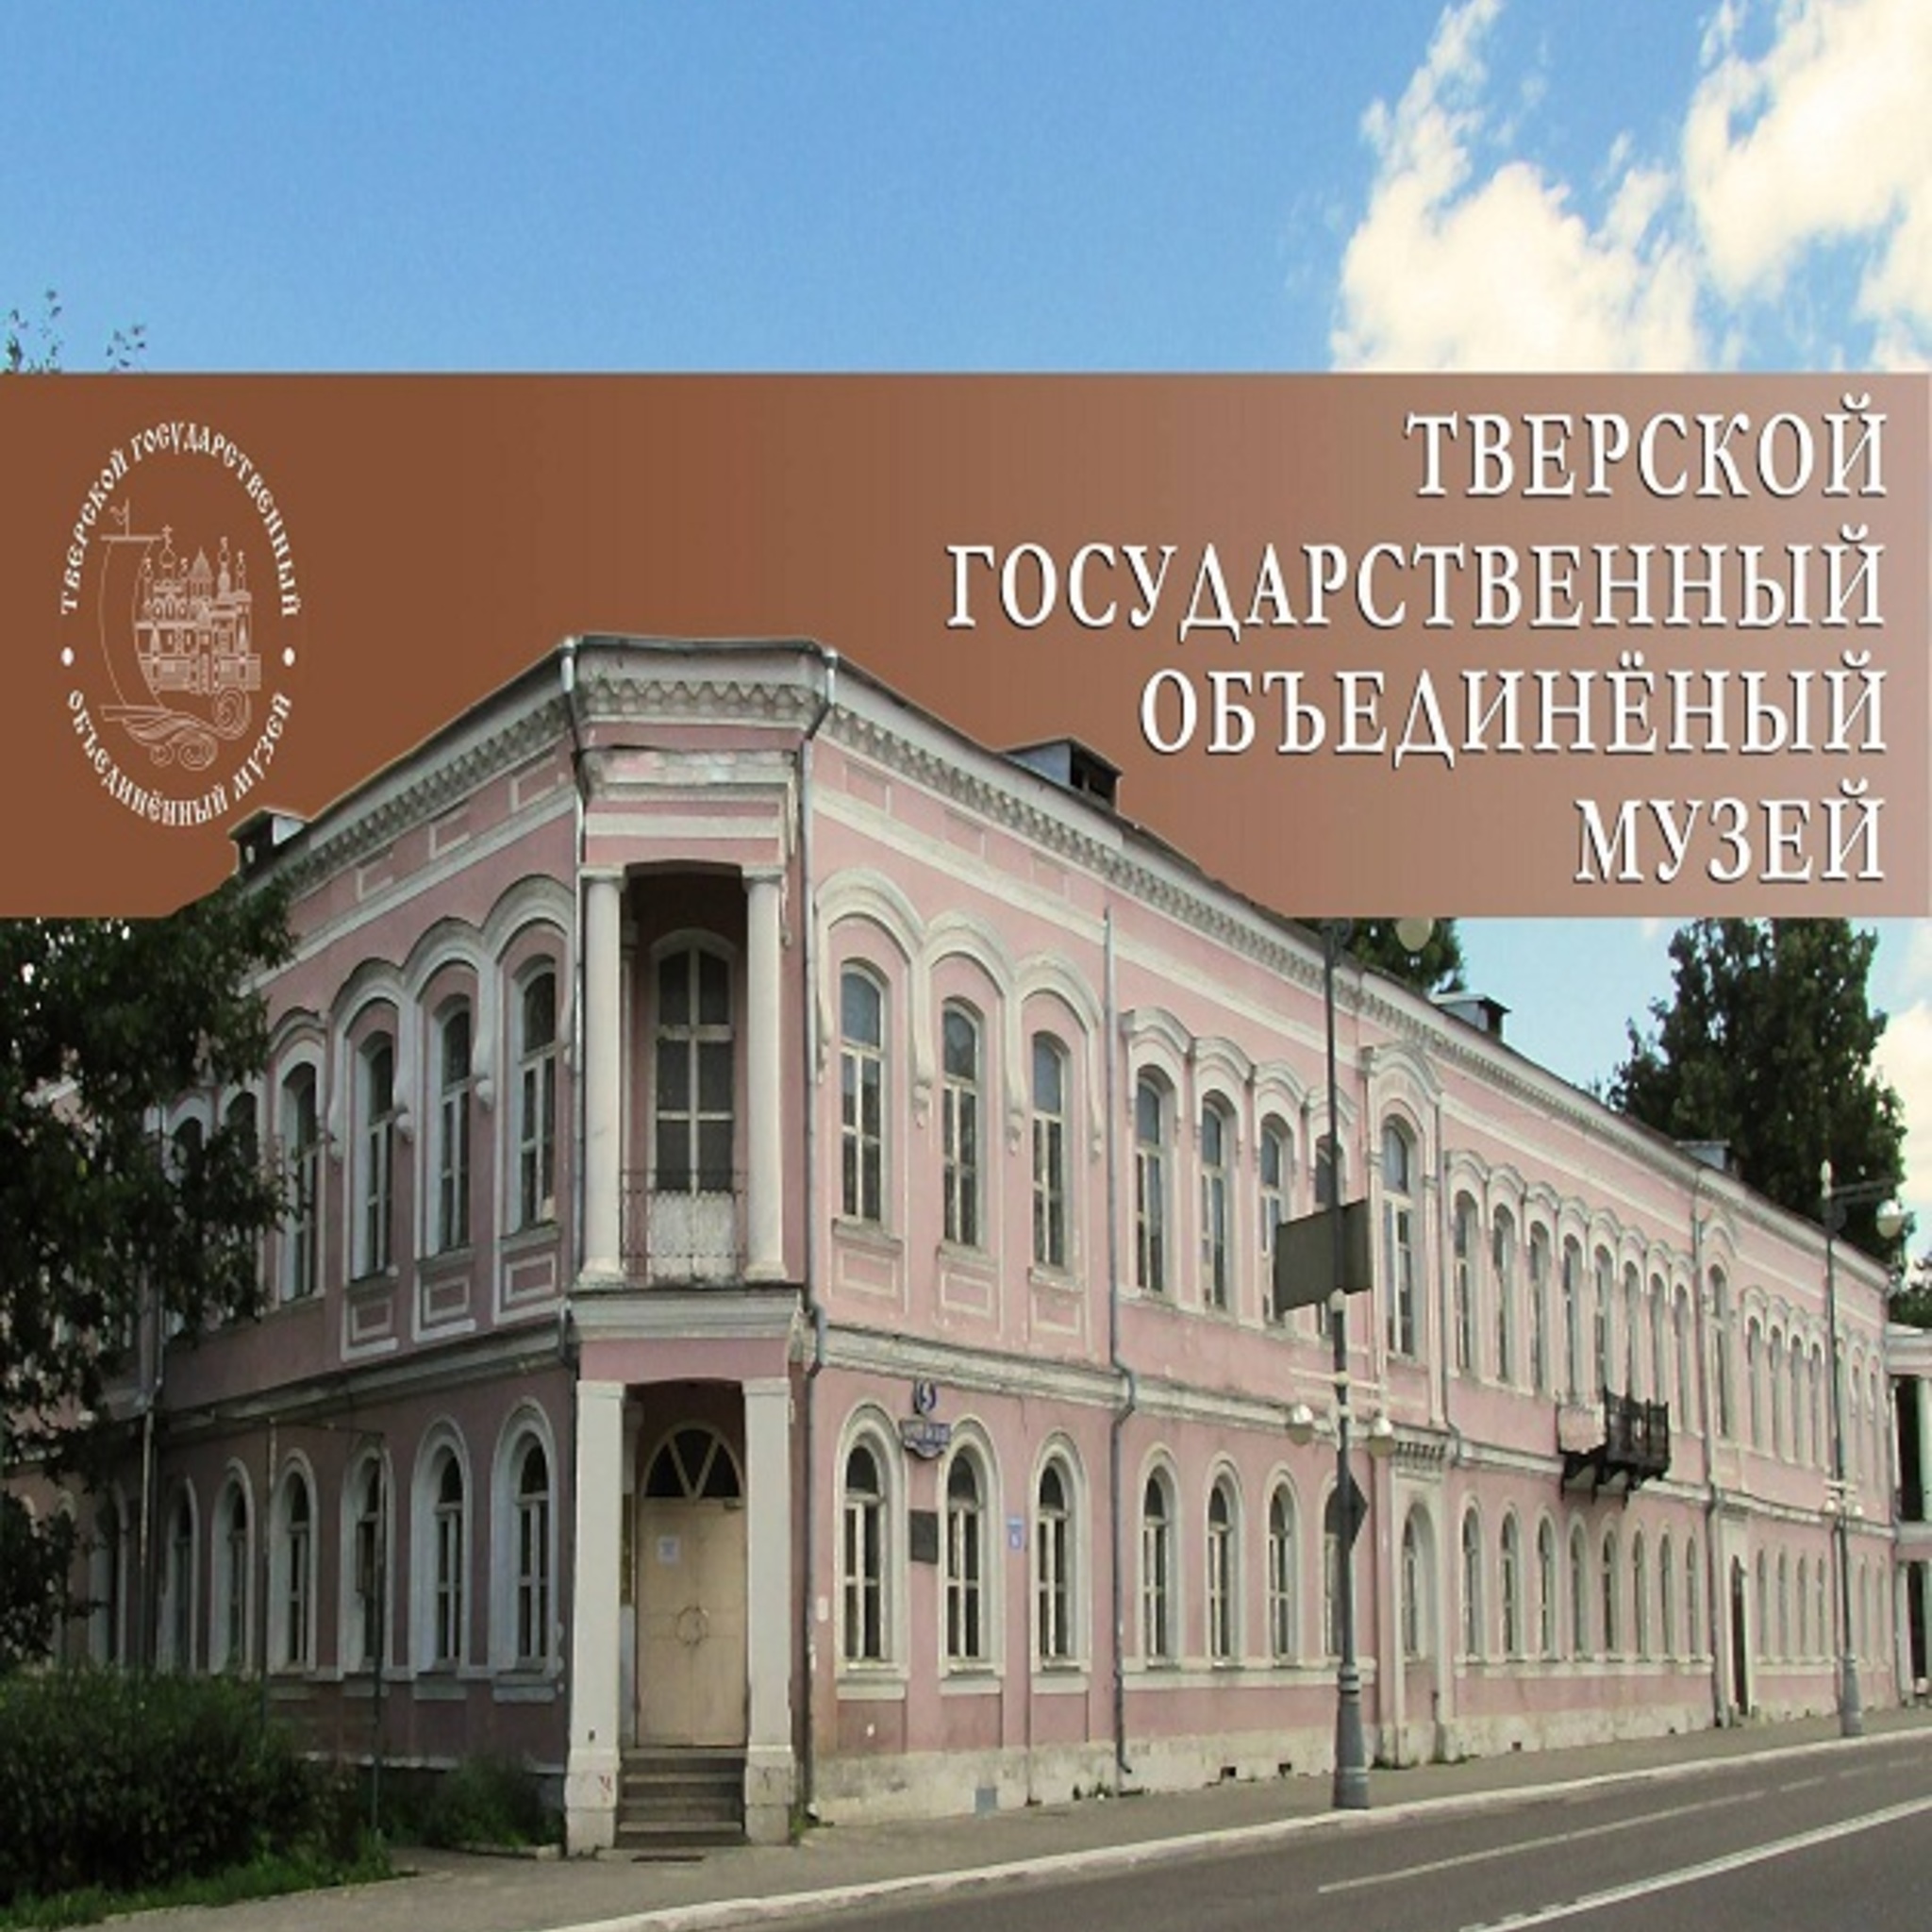 Our events Tver State United Museum on May 2015